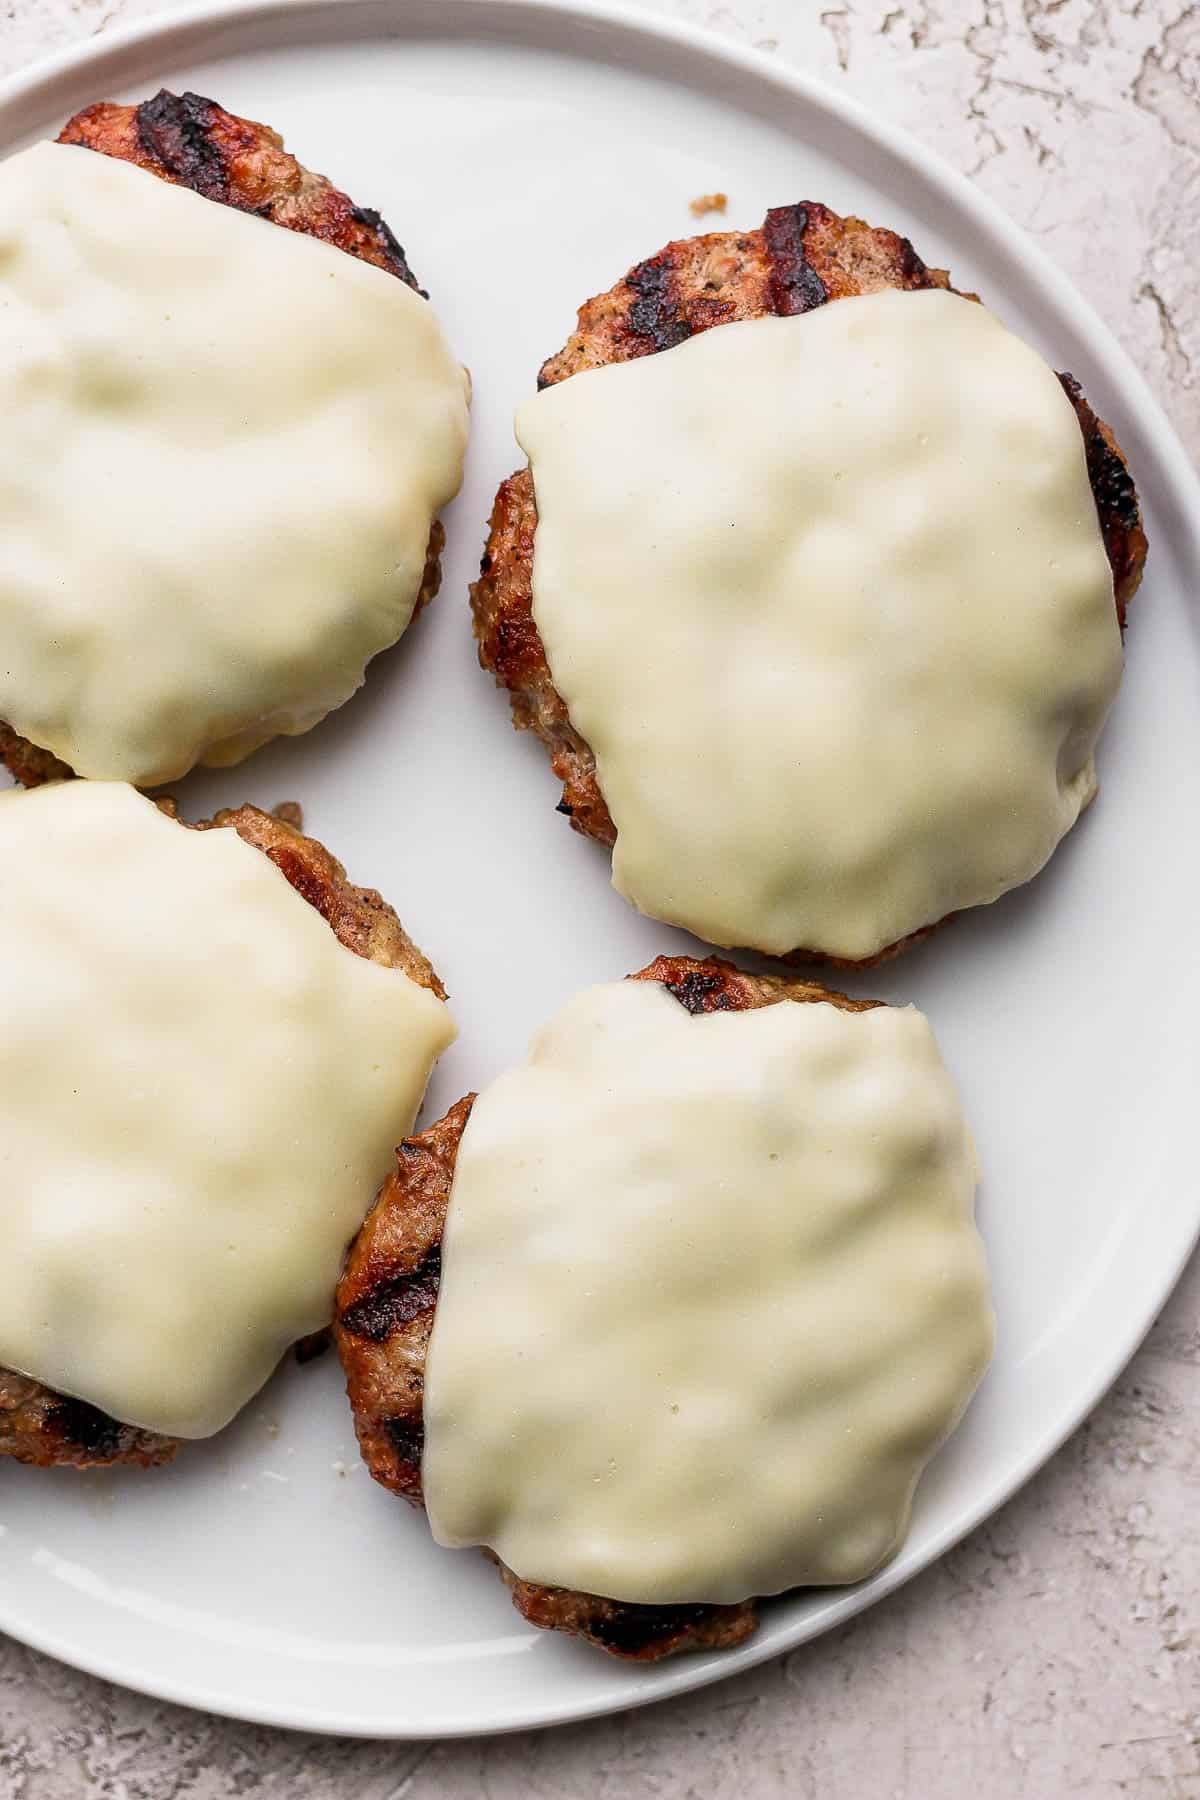 Juicy grilled turkey burgers with cheese.